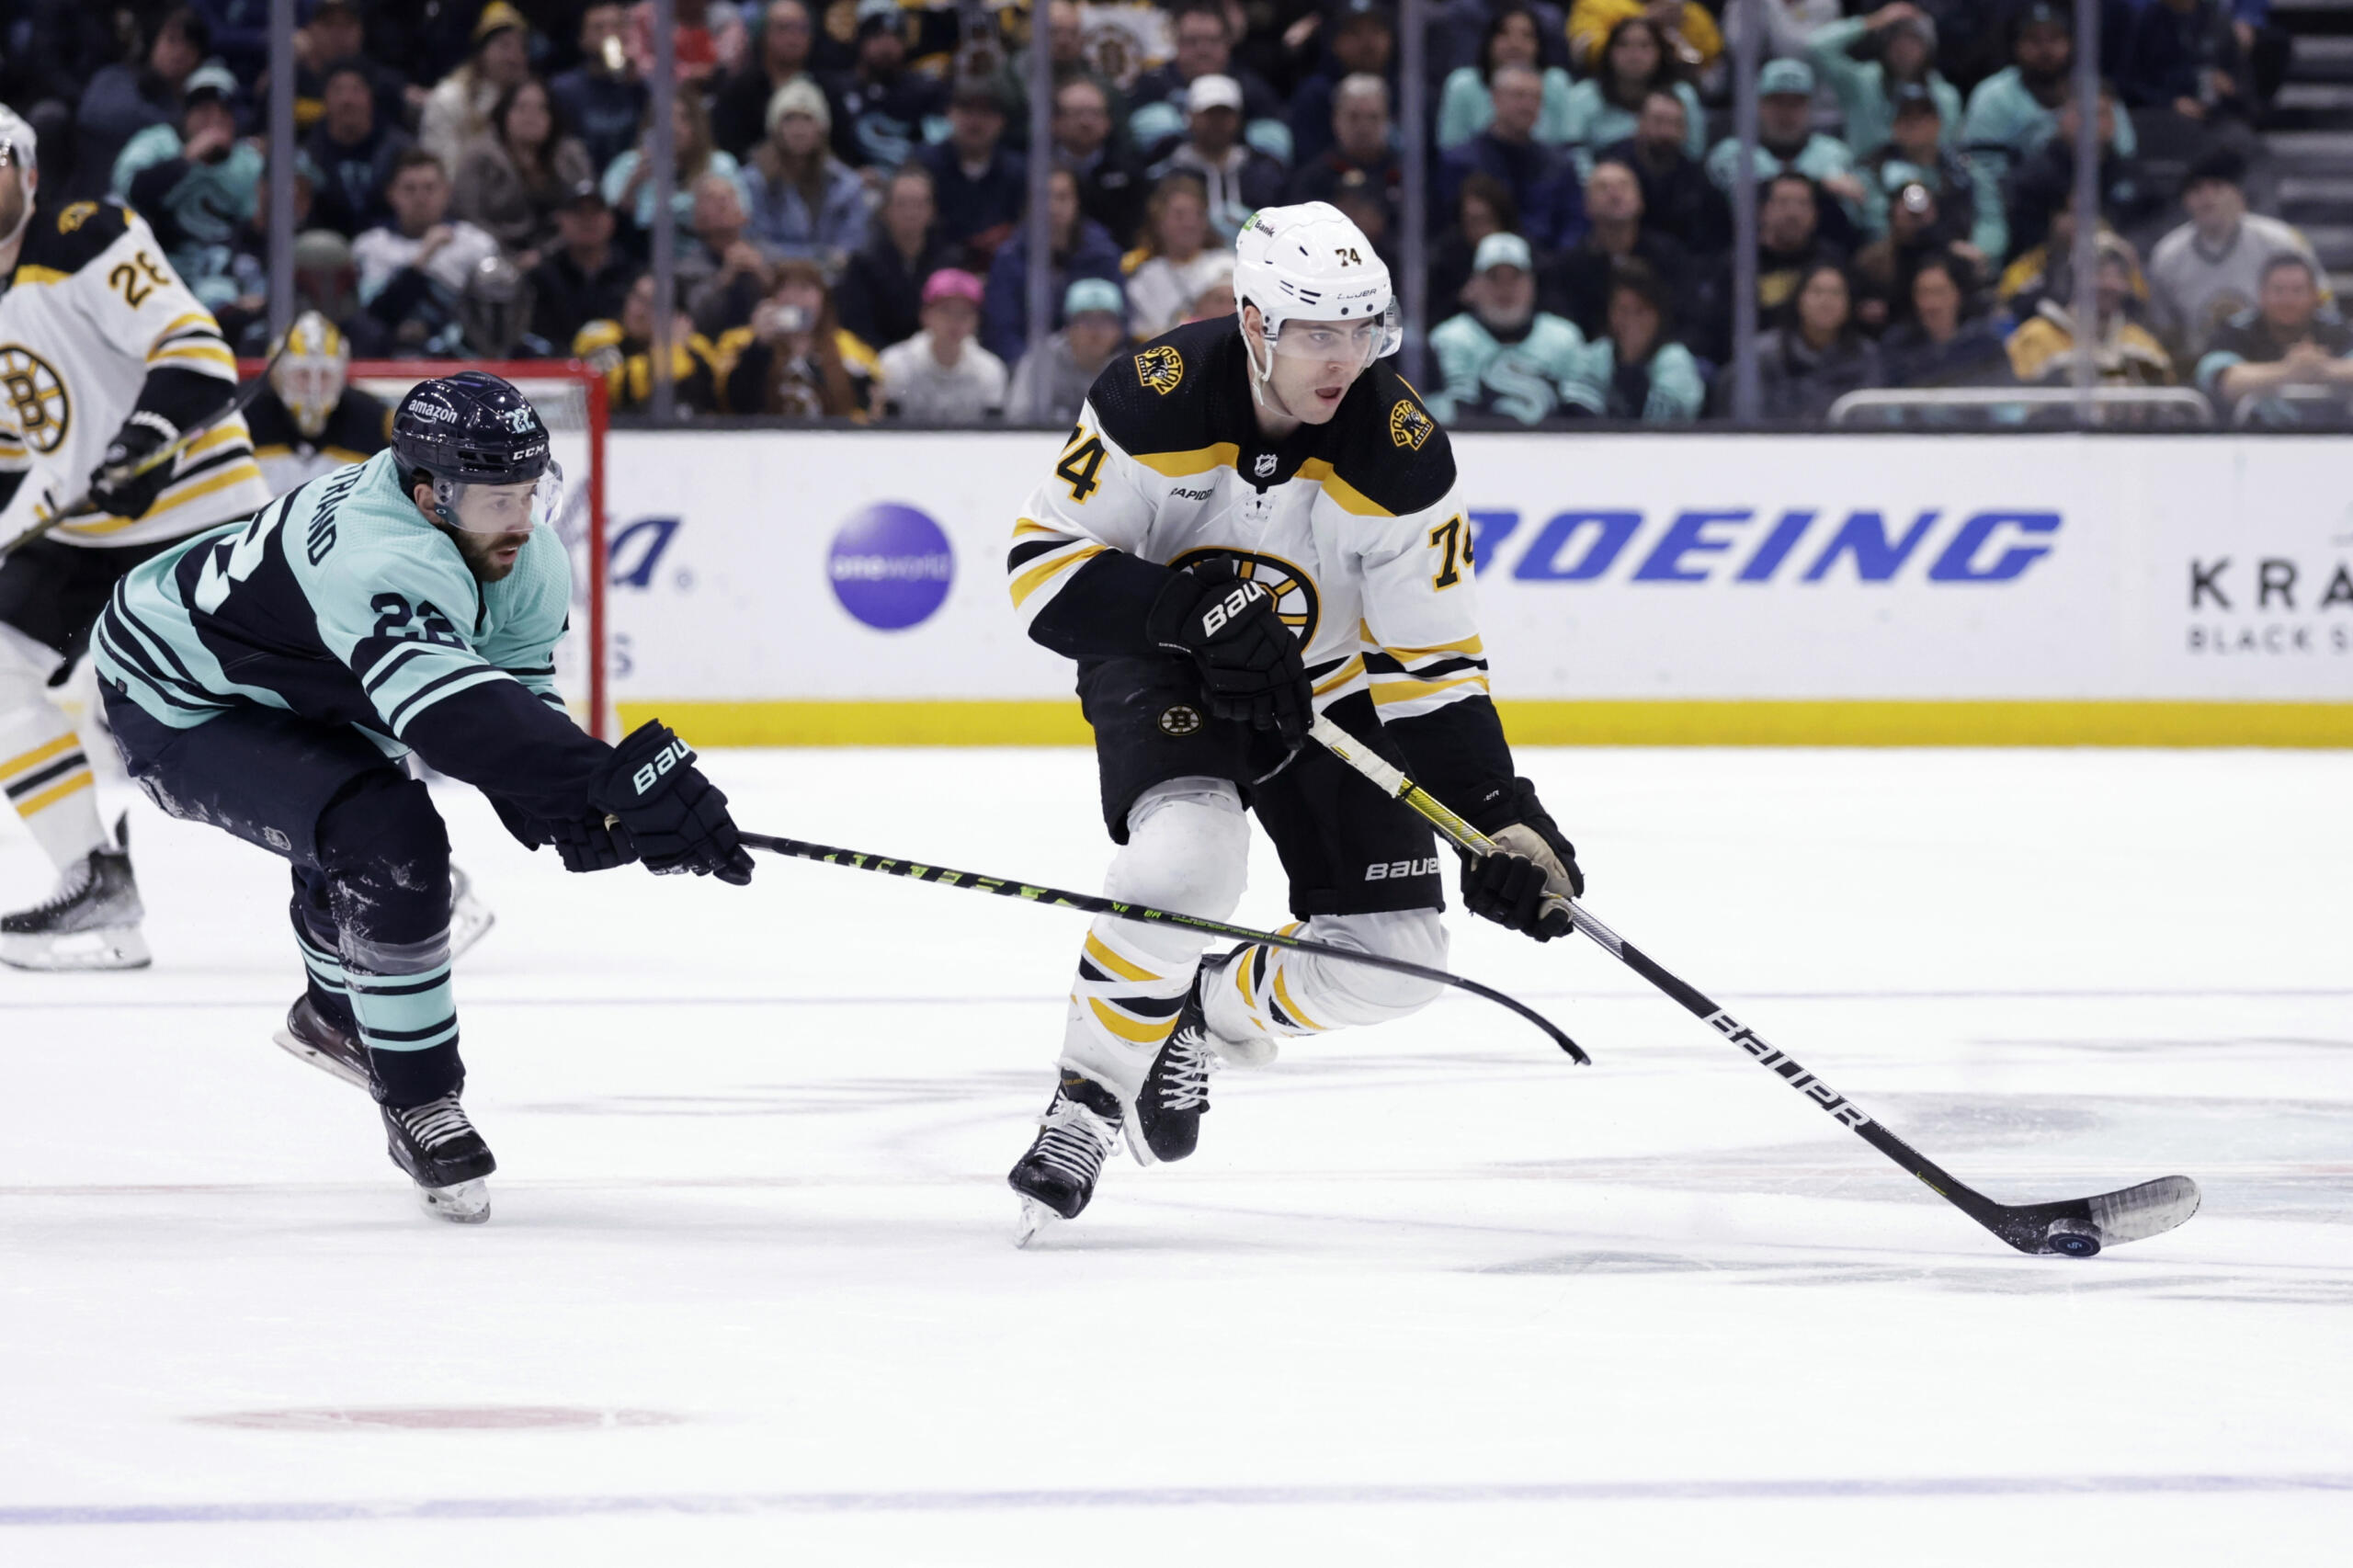 Boston Bruins left wing Jake DeBrusk (74) skates with the puck as Seattle Kraken right wing Oliver Bjorkstrand (22) defends during the third period of an NHL hockey game Thursday, Feb. 23, 2023, in Seattle. The Bruins won 6-5.